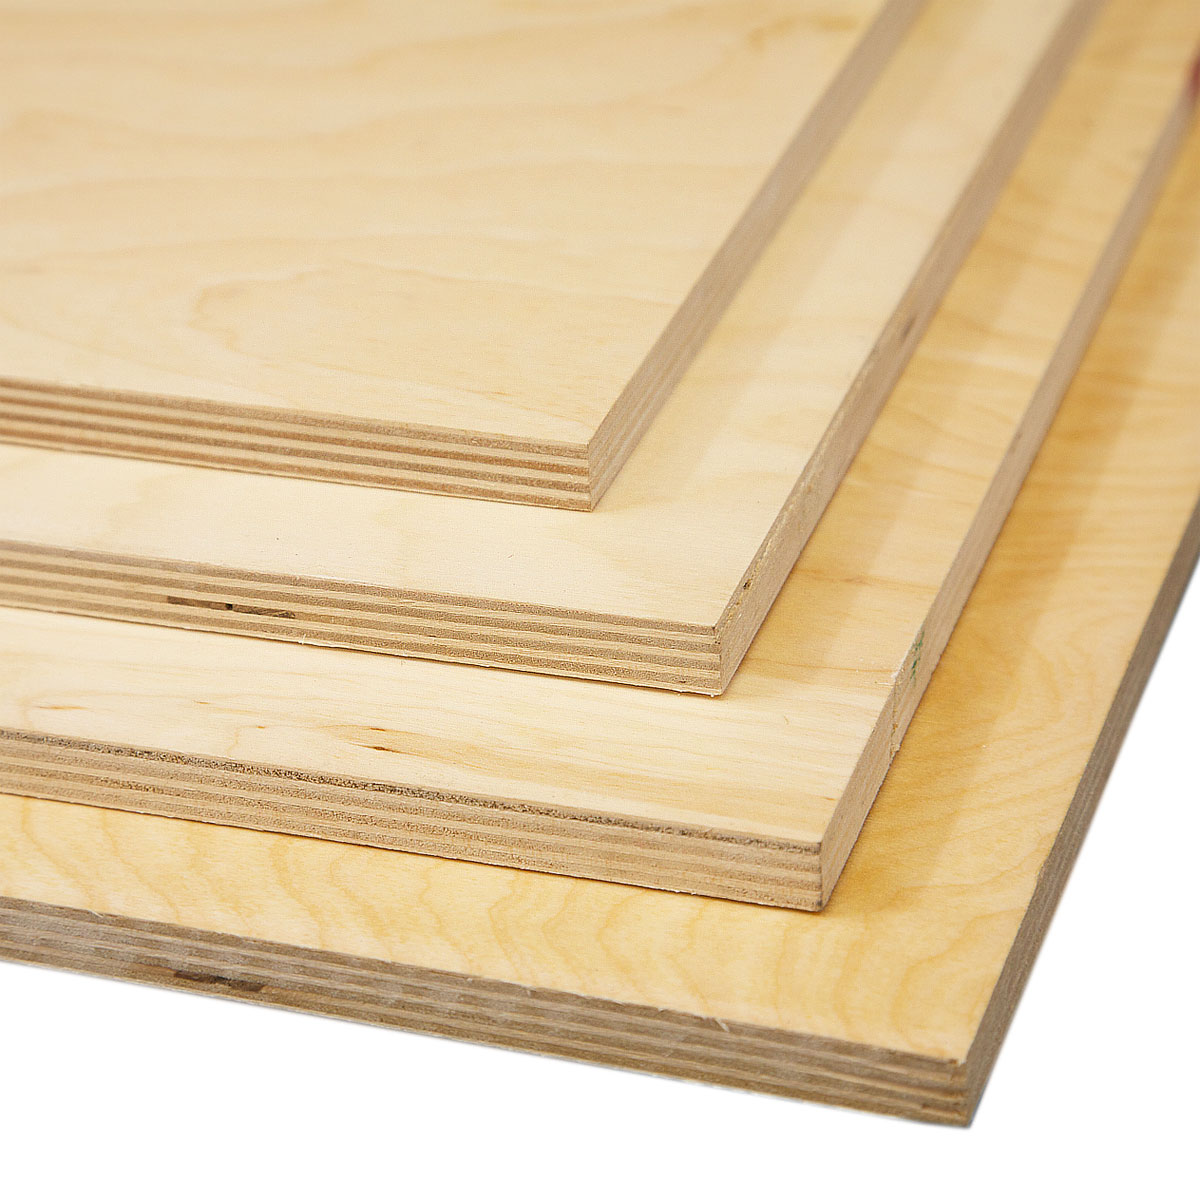 example of plywood